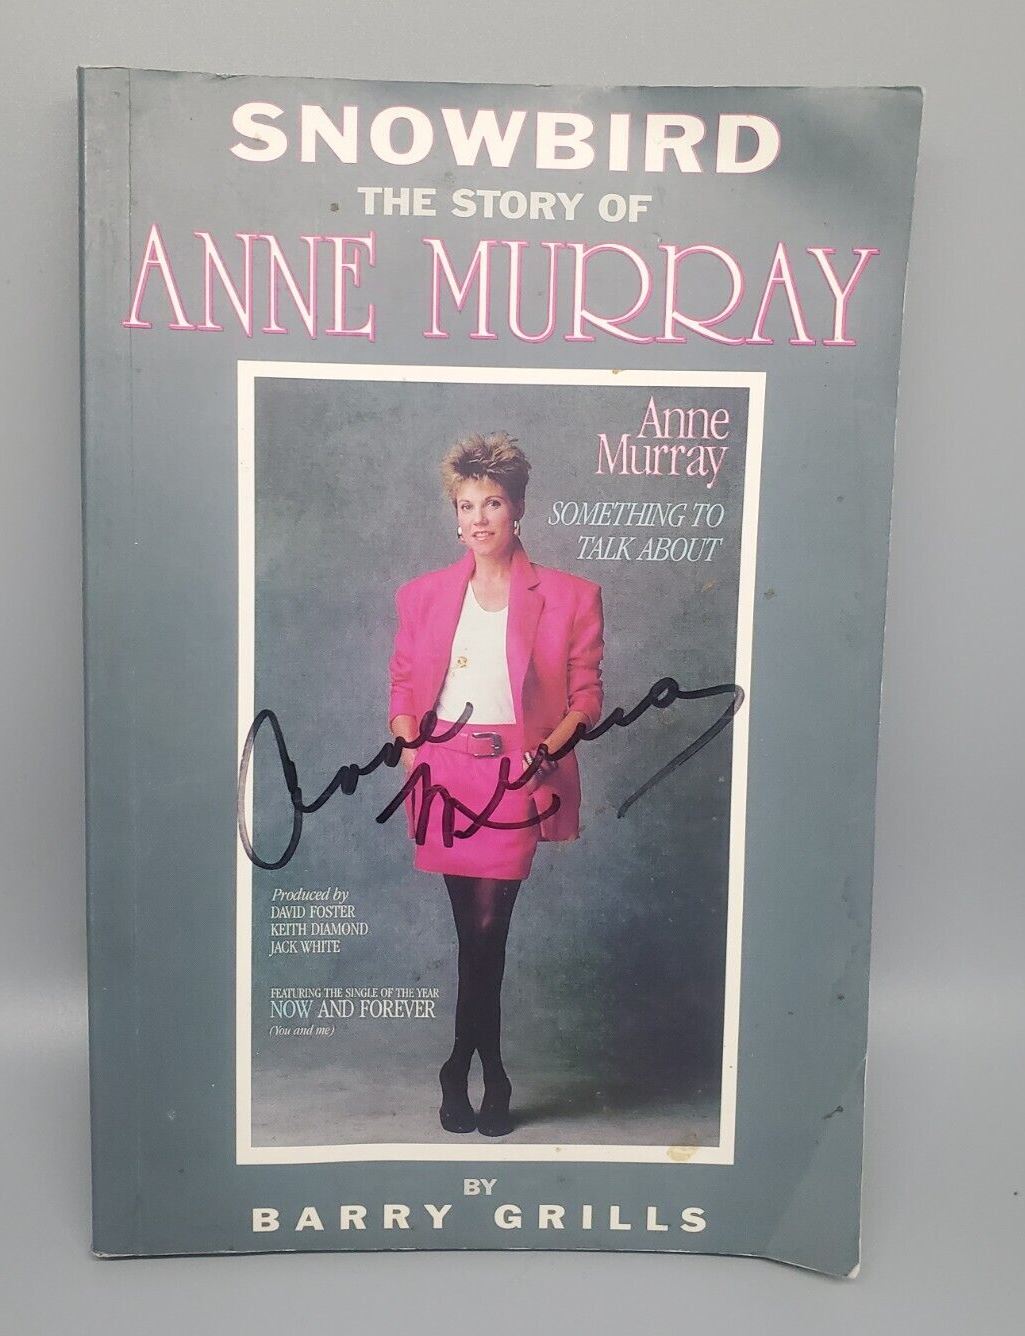 1996 Anne Murray Signed Book Snowbird by Barry Grills